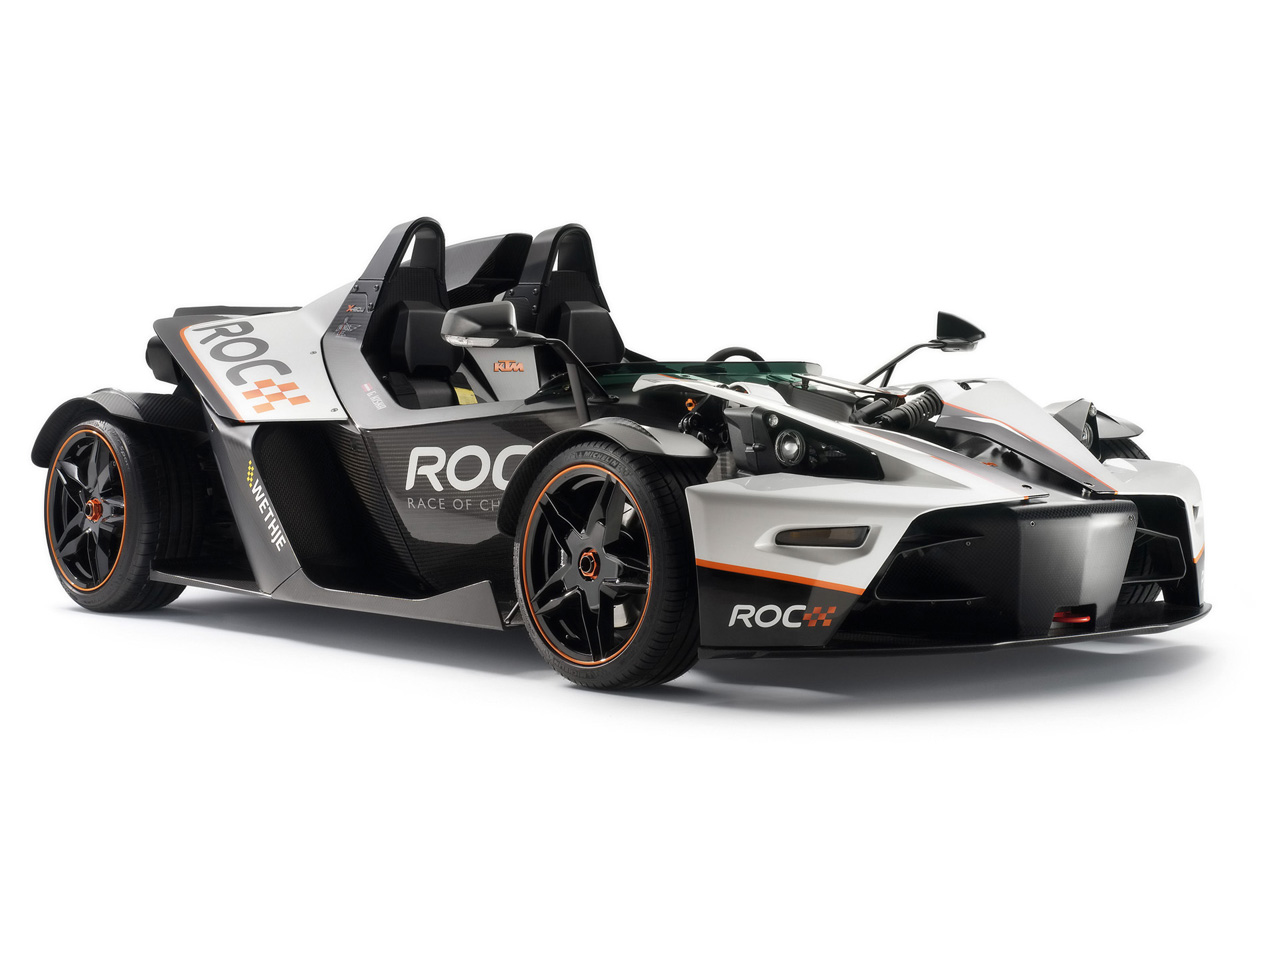 2009 KTM X-Bow ROC - Front And Side - 1280x960 - Wallpaper